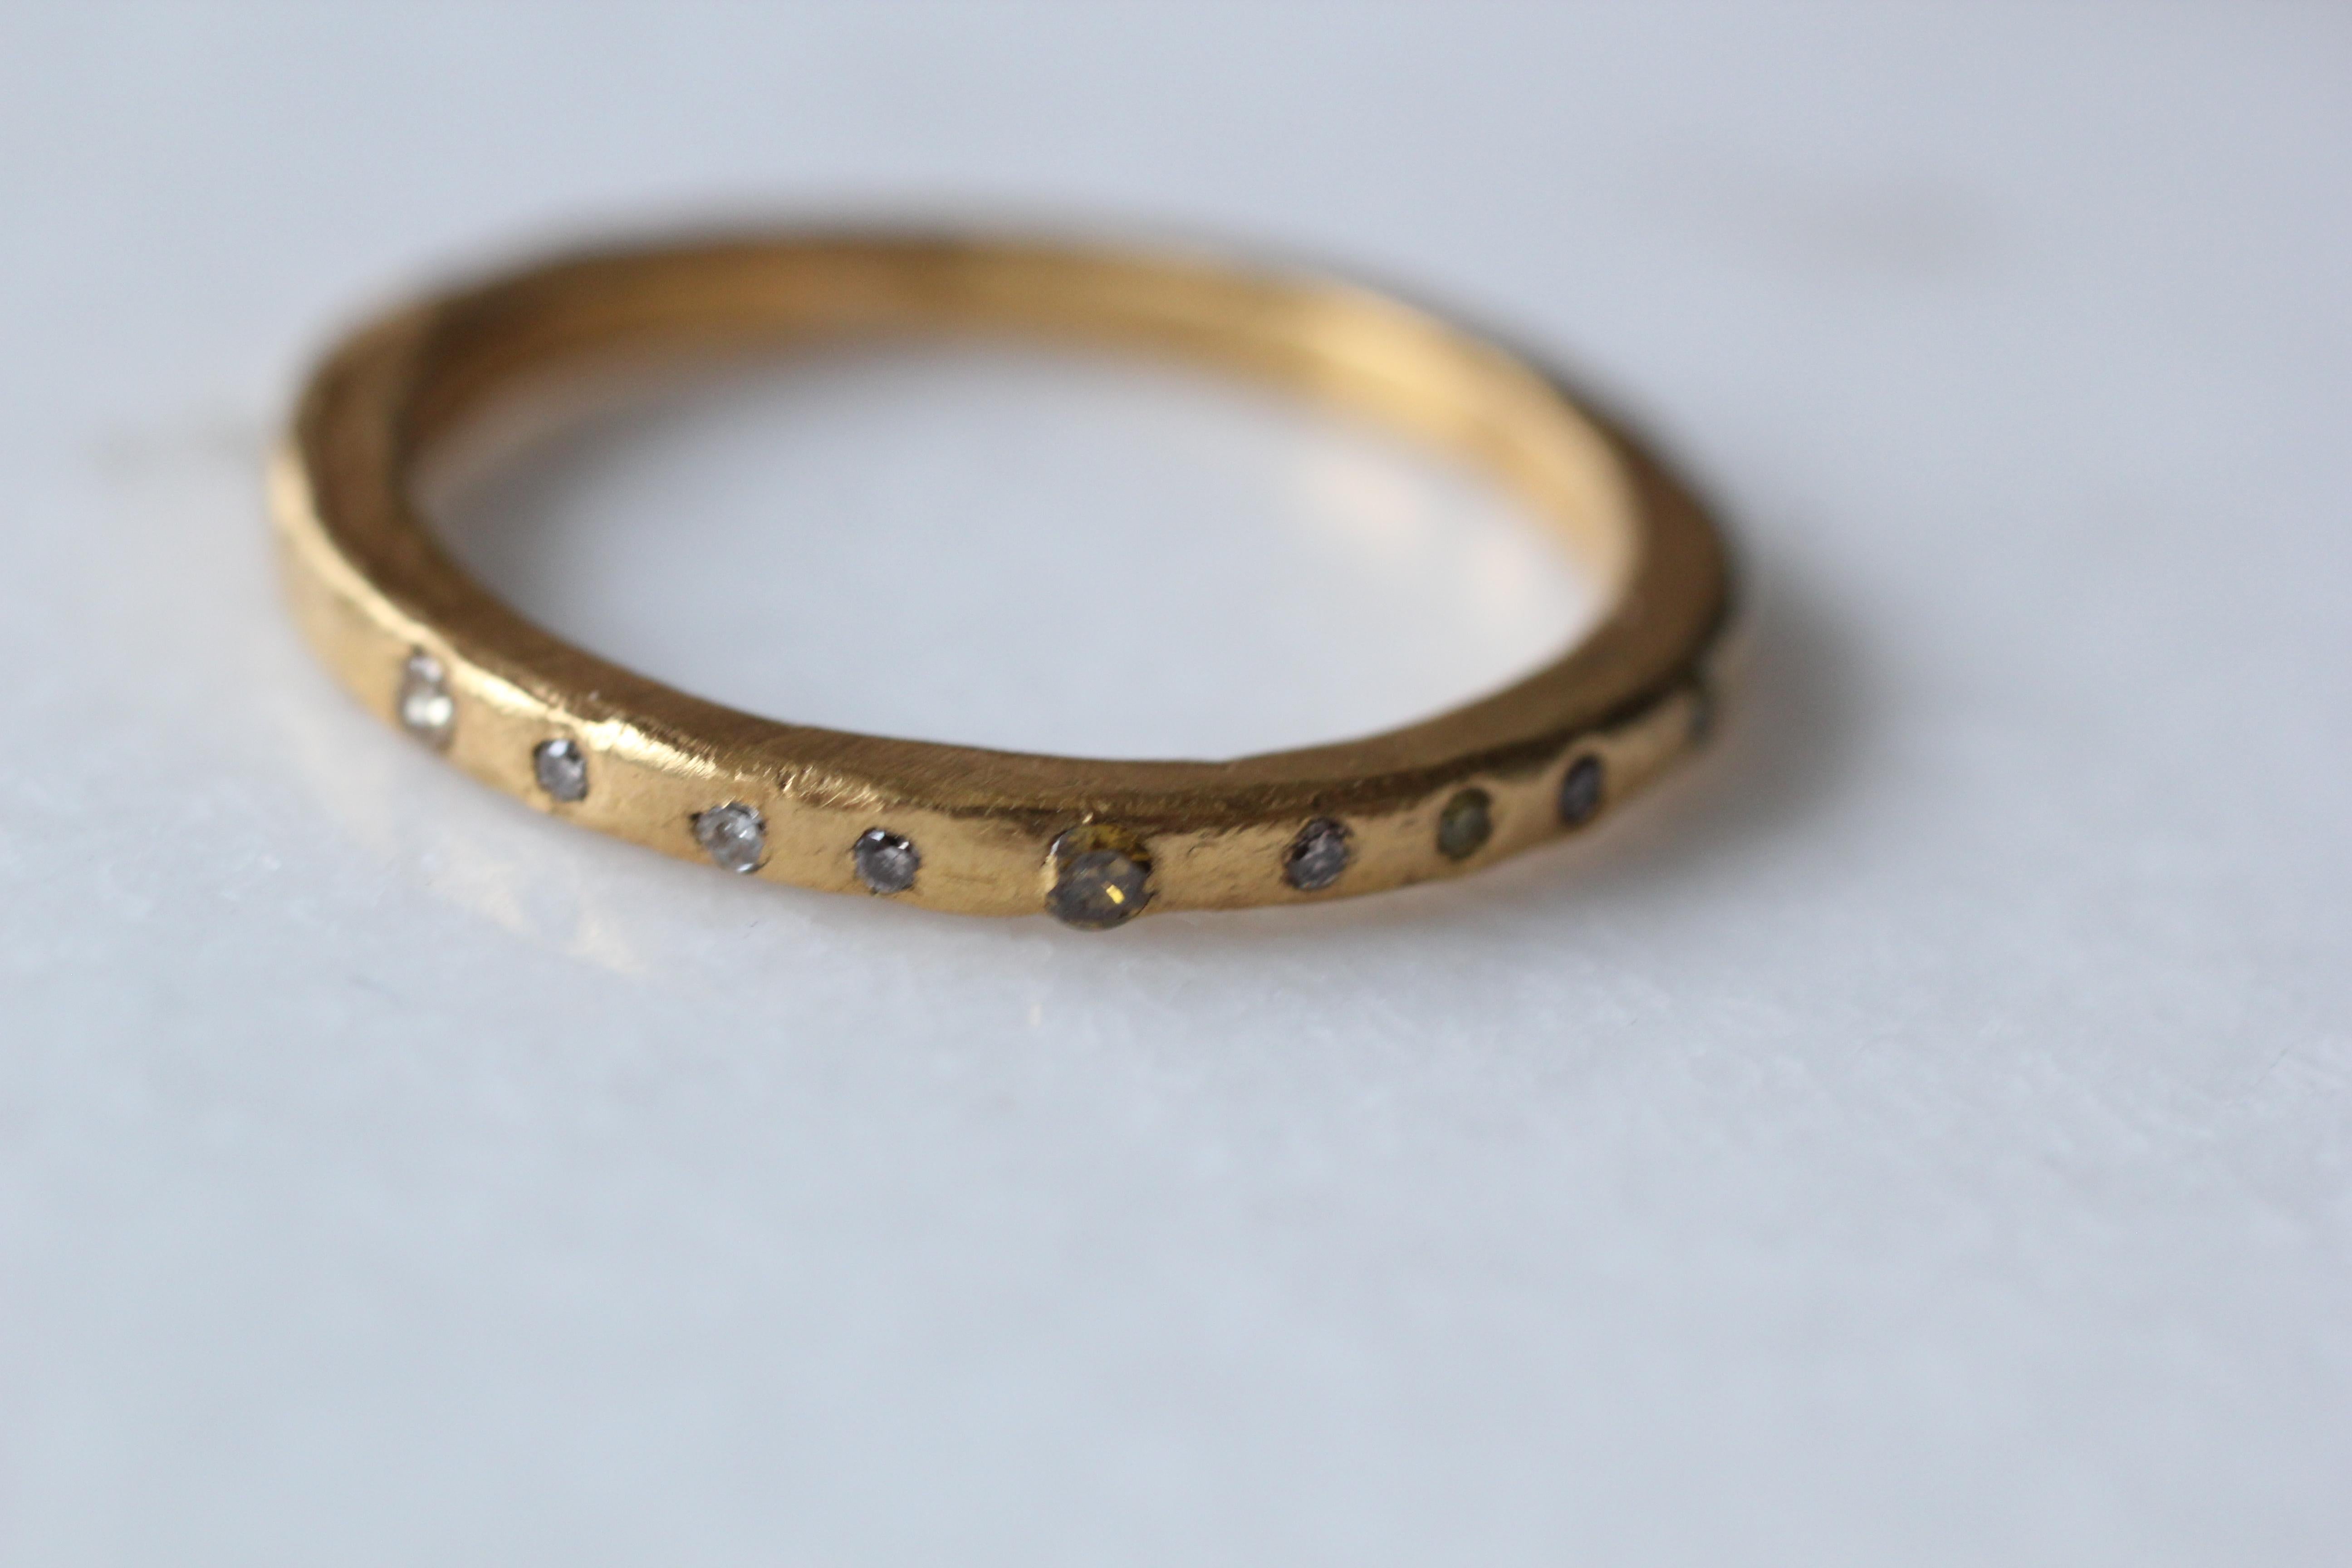 Simplicity Small wedding Band ring with 9 diamonds. For sale here is one handmade wedding band ring in 21k gold set with 9 diamonds. Handmade contemporary design.  Wear it alone or combine it with our other AB Jewelry NYC ring designs to create a